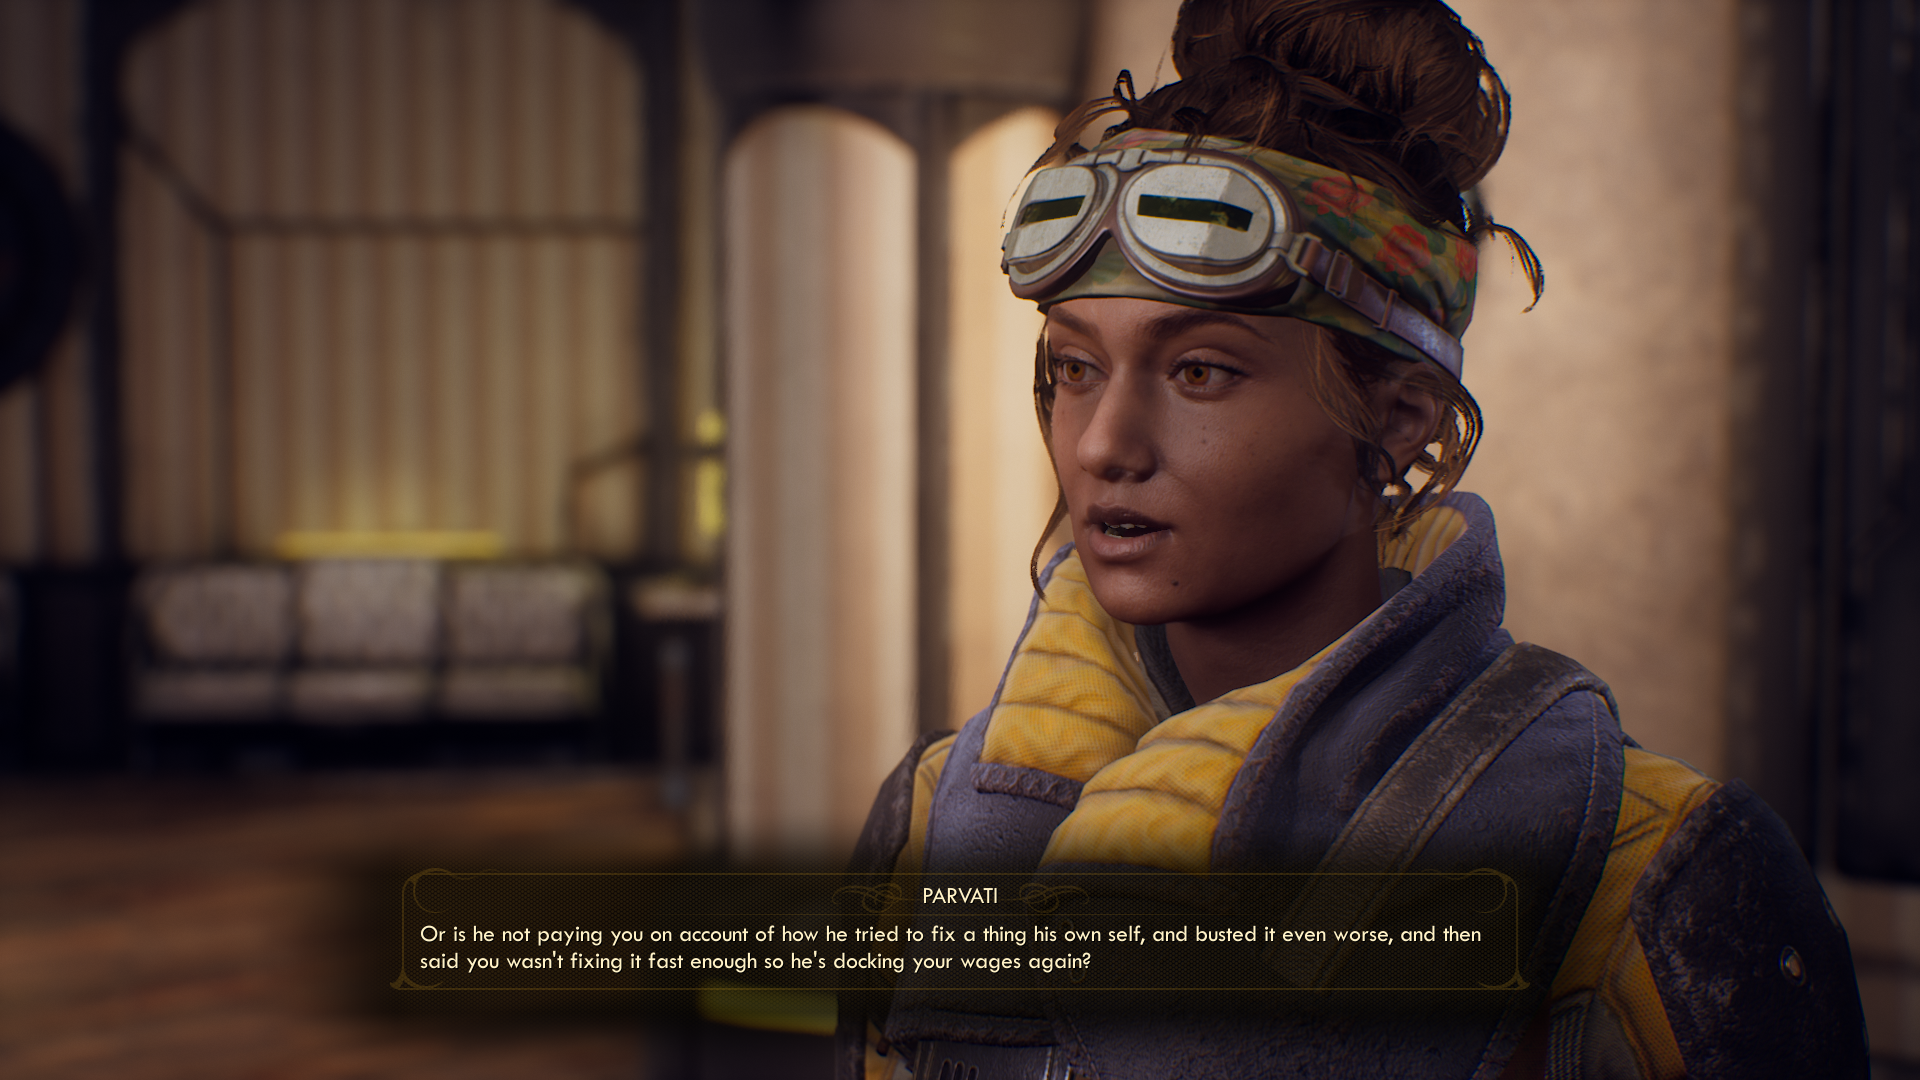 A woman, Parvati, with brown hair tied back and slit goggles on her head, complaining about her boss